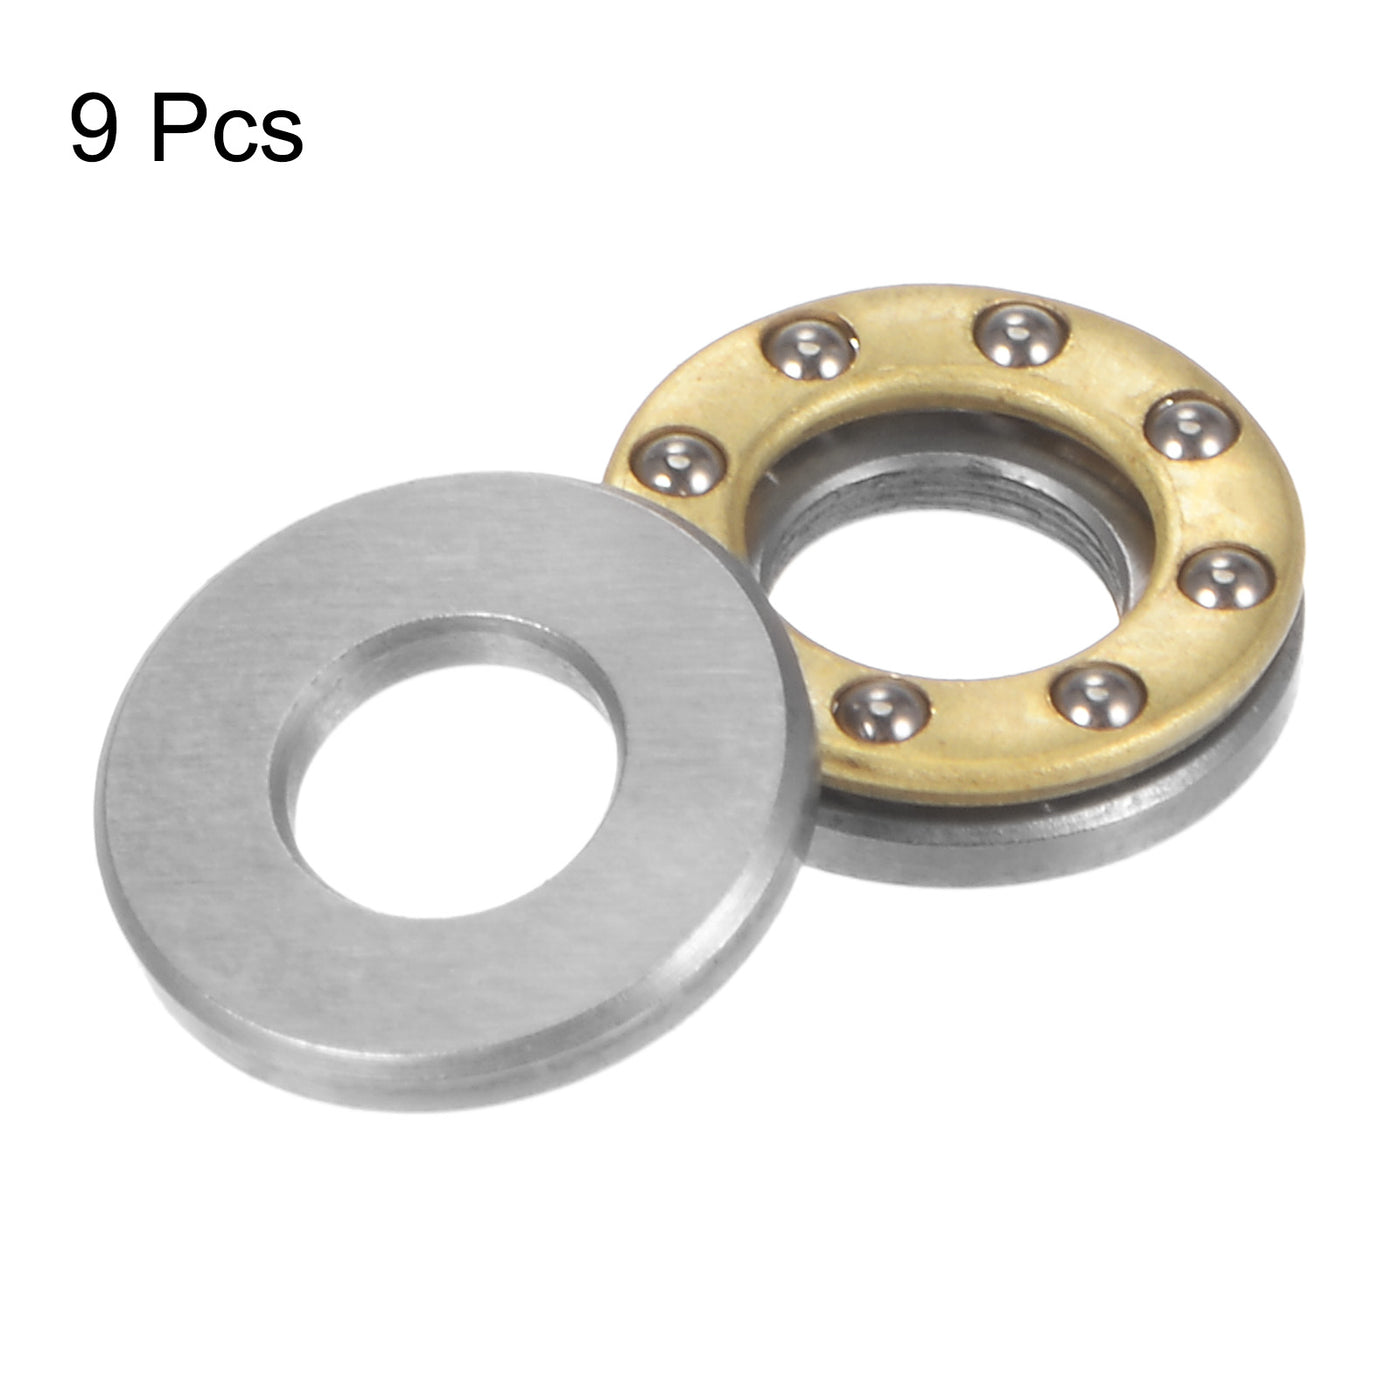 uxcell Uxcell F5-11M Thrust Ball Bearing 5x11x4.5mm Brass with Washers 9pcs